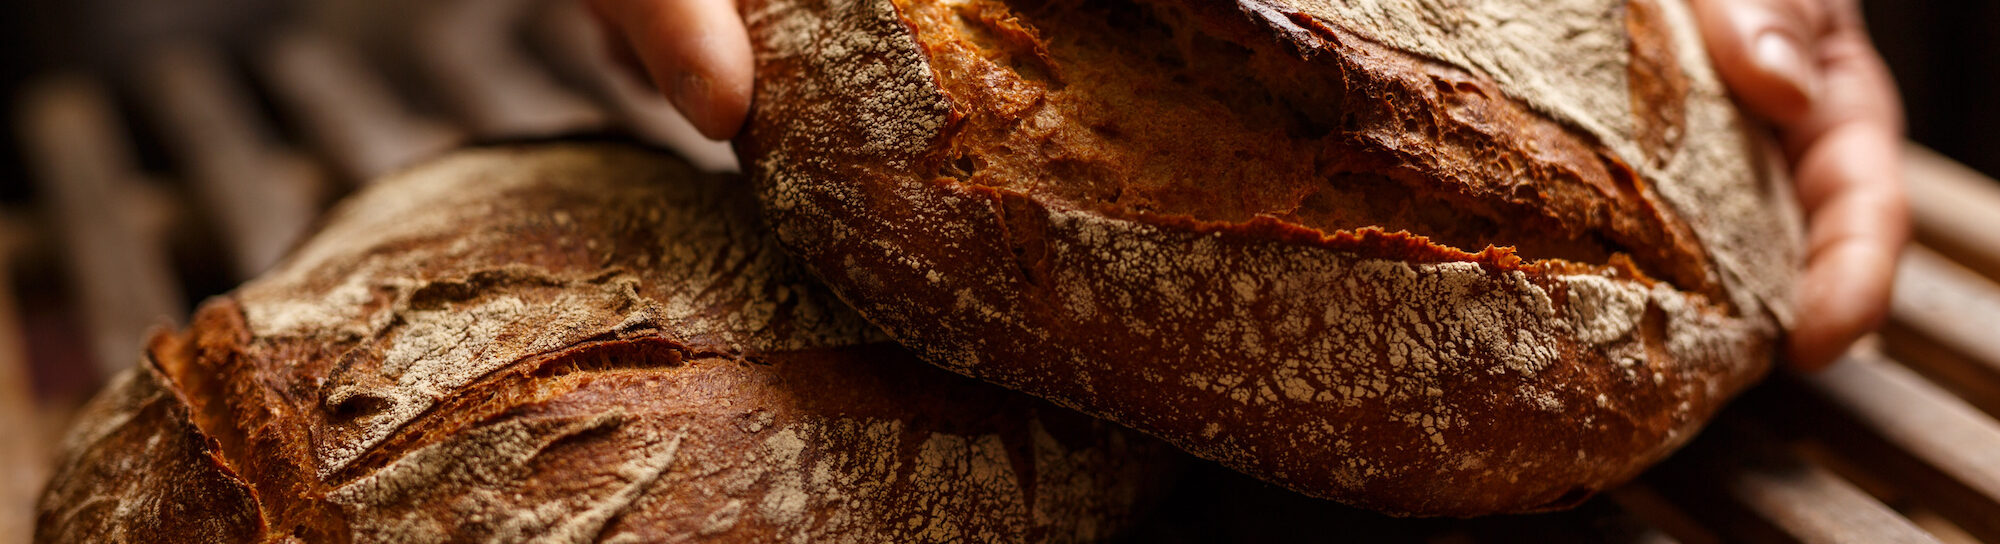 Could bread soon be unrecognizable?